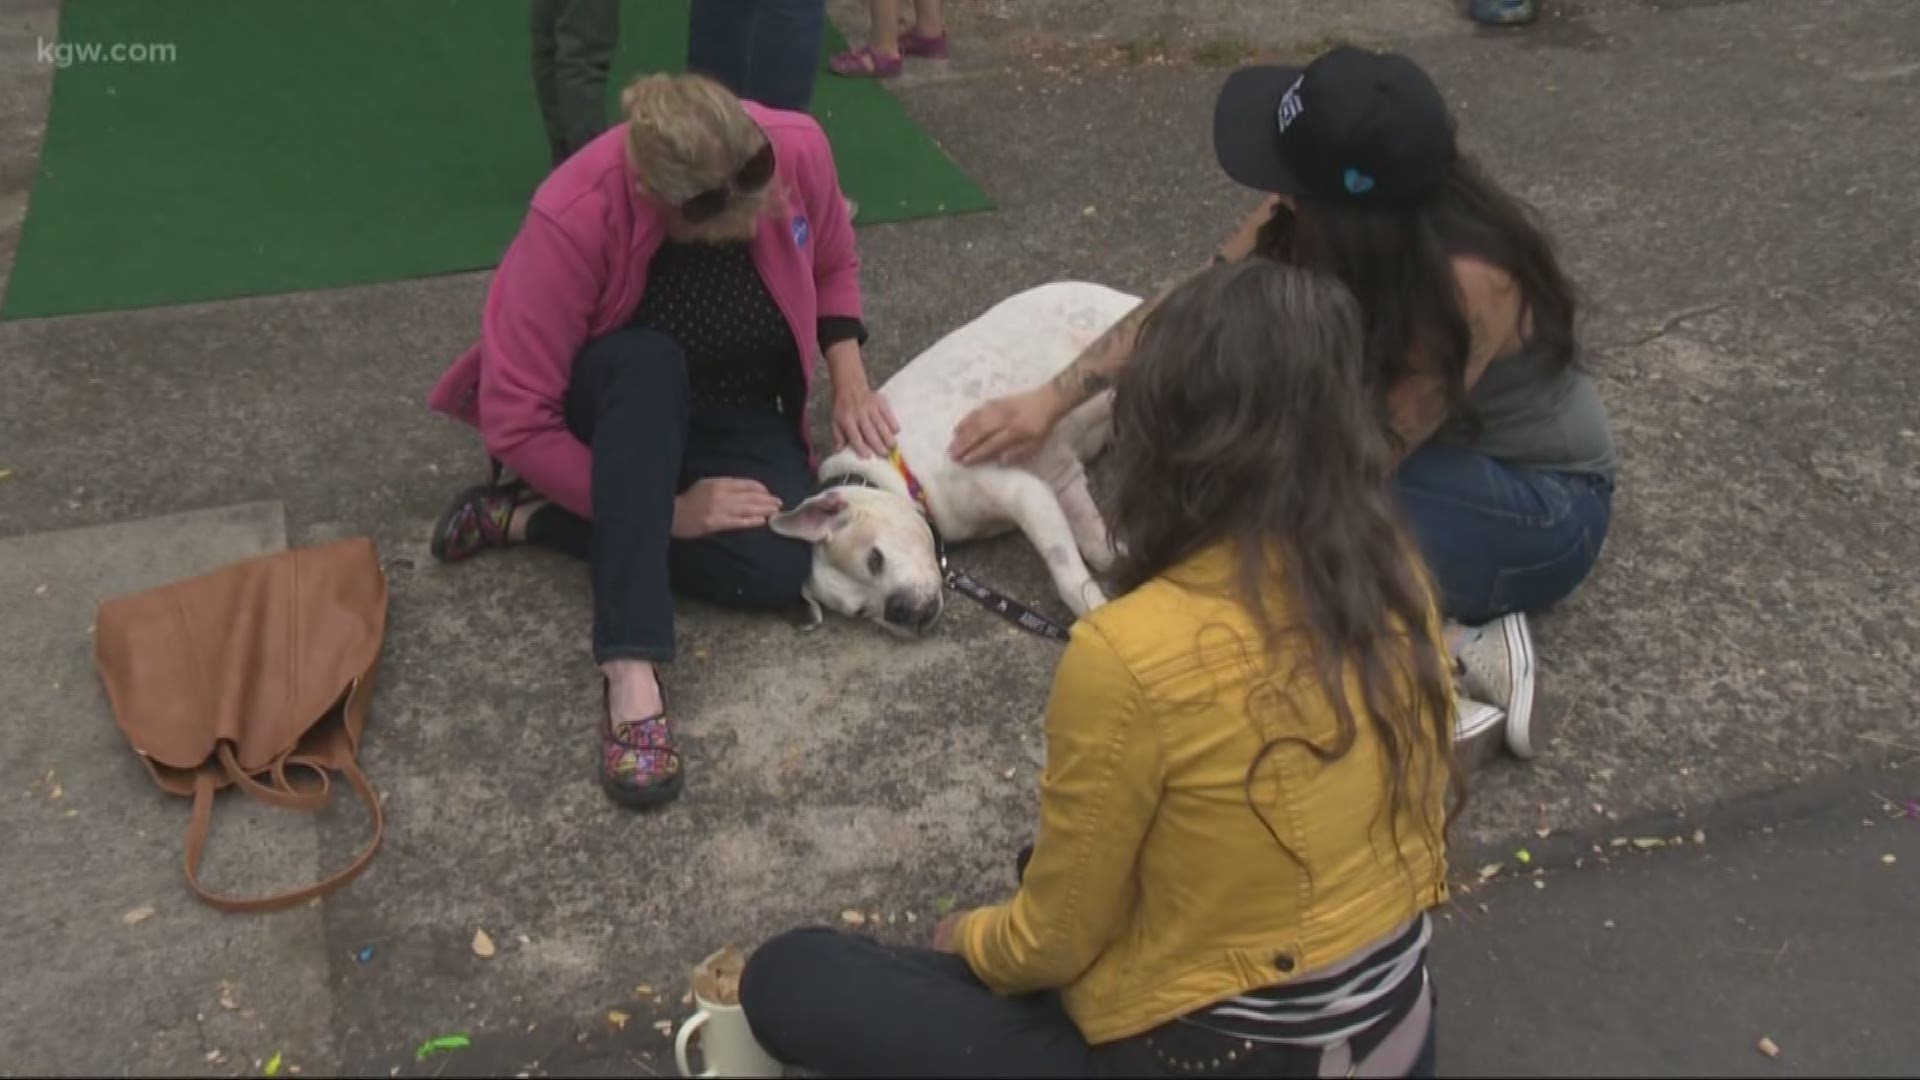 Aug. 17 was National Clear the Shelters Day. Today, on Sunday, a local non-profit called One Tail at a Time PDX decided to try and clear the foster homes by introducing interested families to sweet foster dogs available for adoption. During our interview, we caught a cute moment!